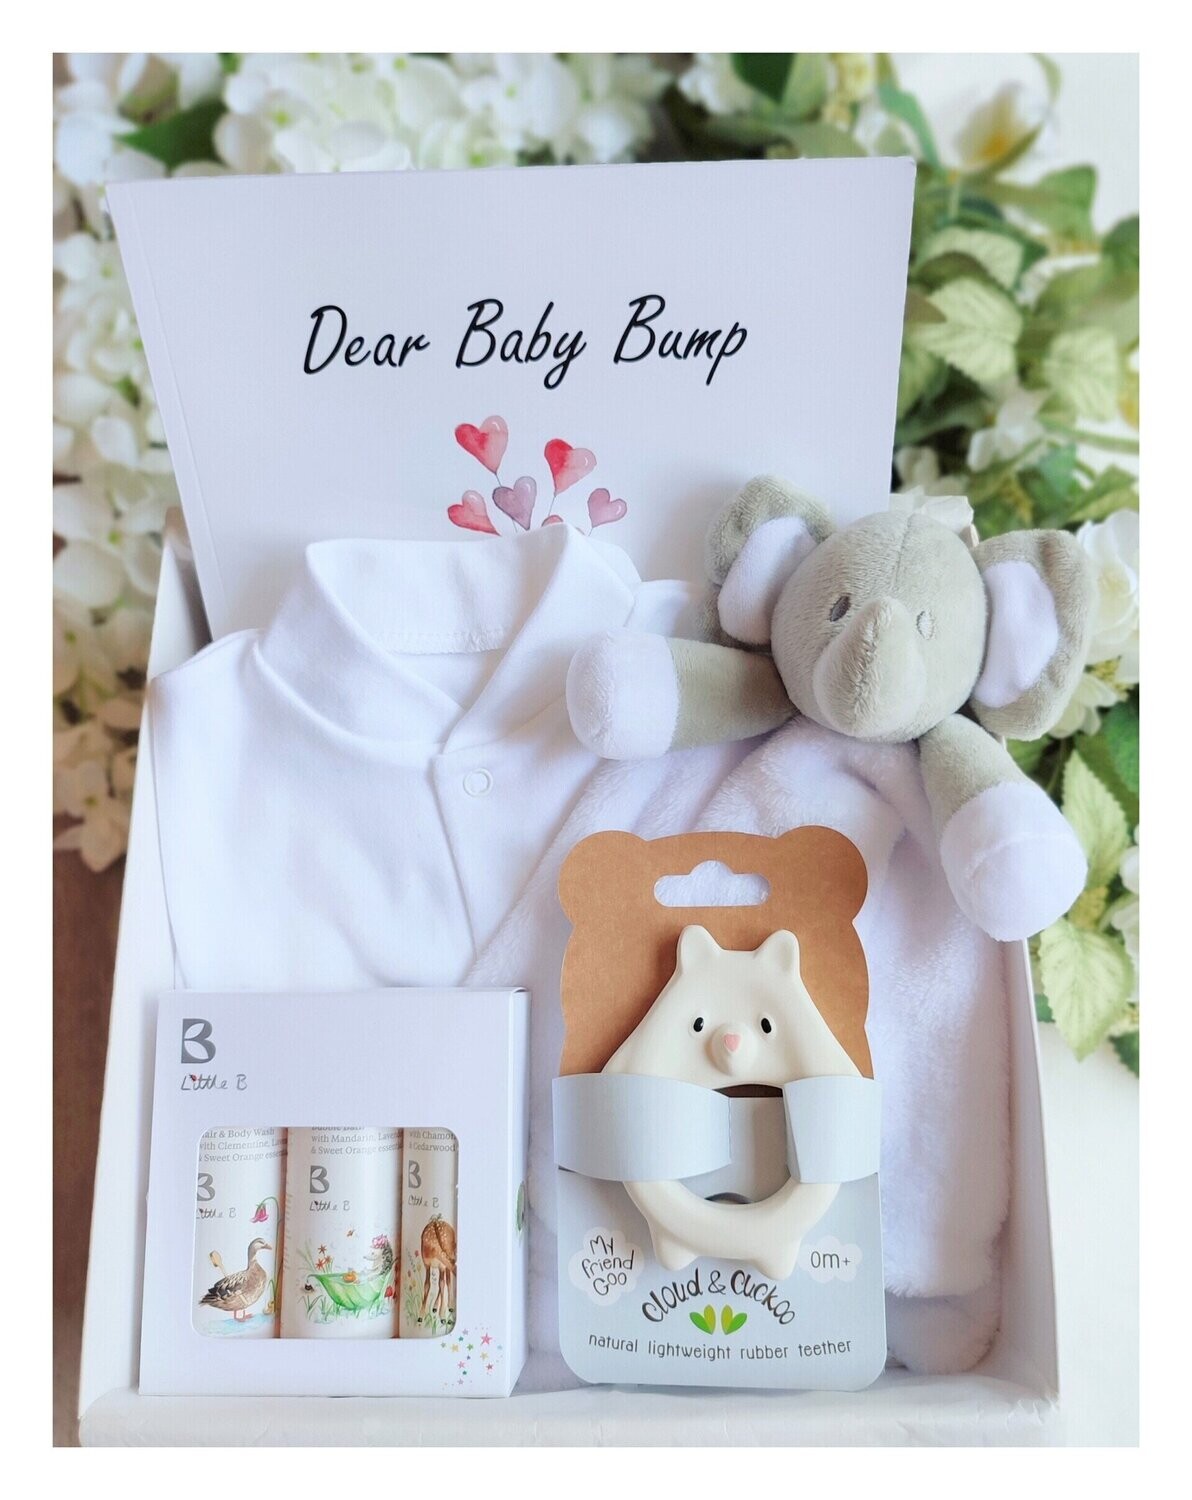 Cuddle & Play New Baby Gift Box